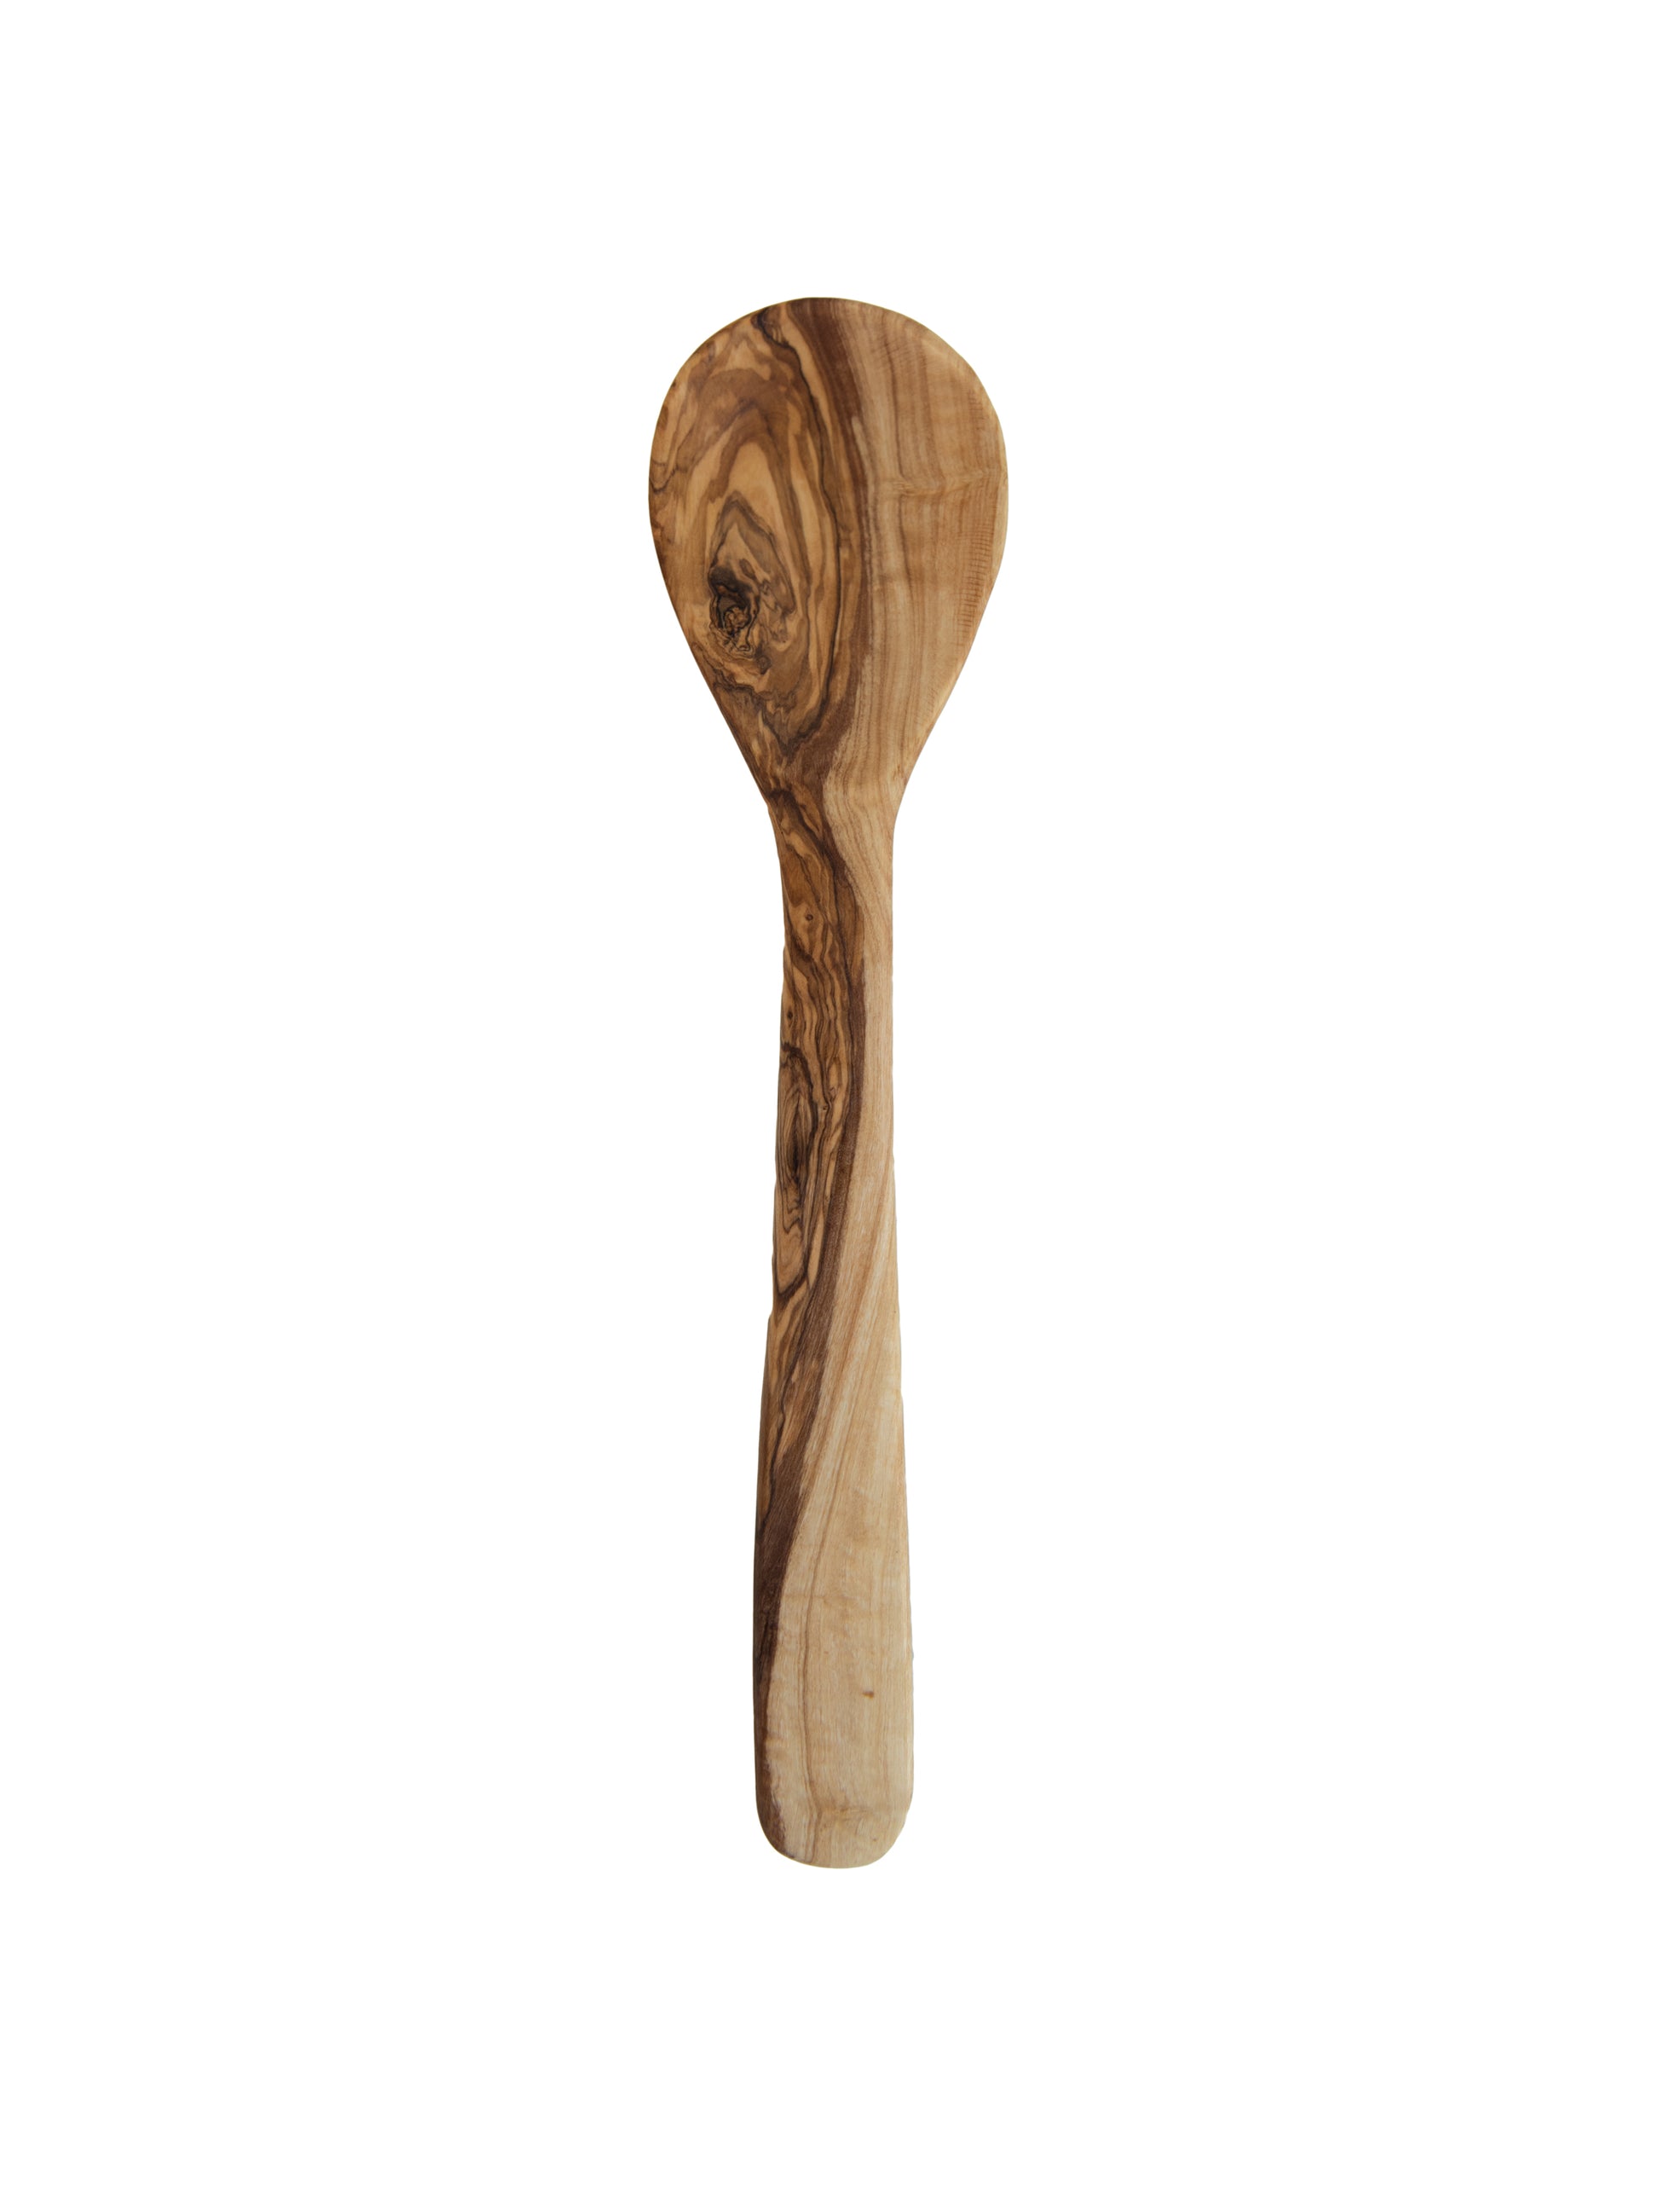 WT Olive Wood Cooking Spoon 13" Weston Table